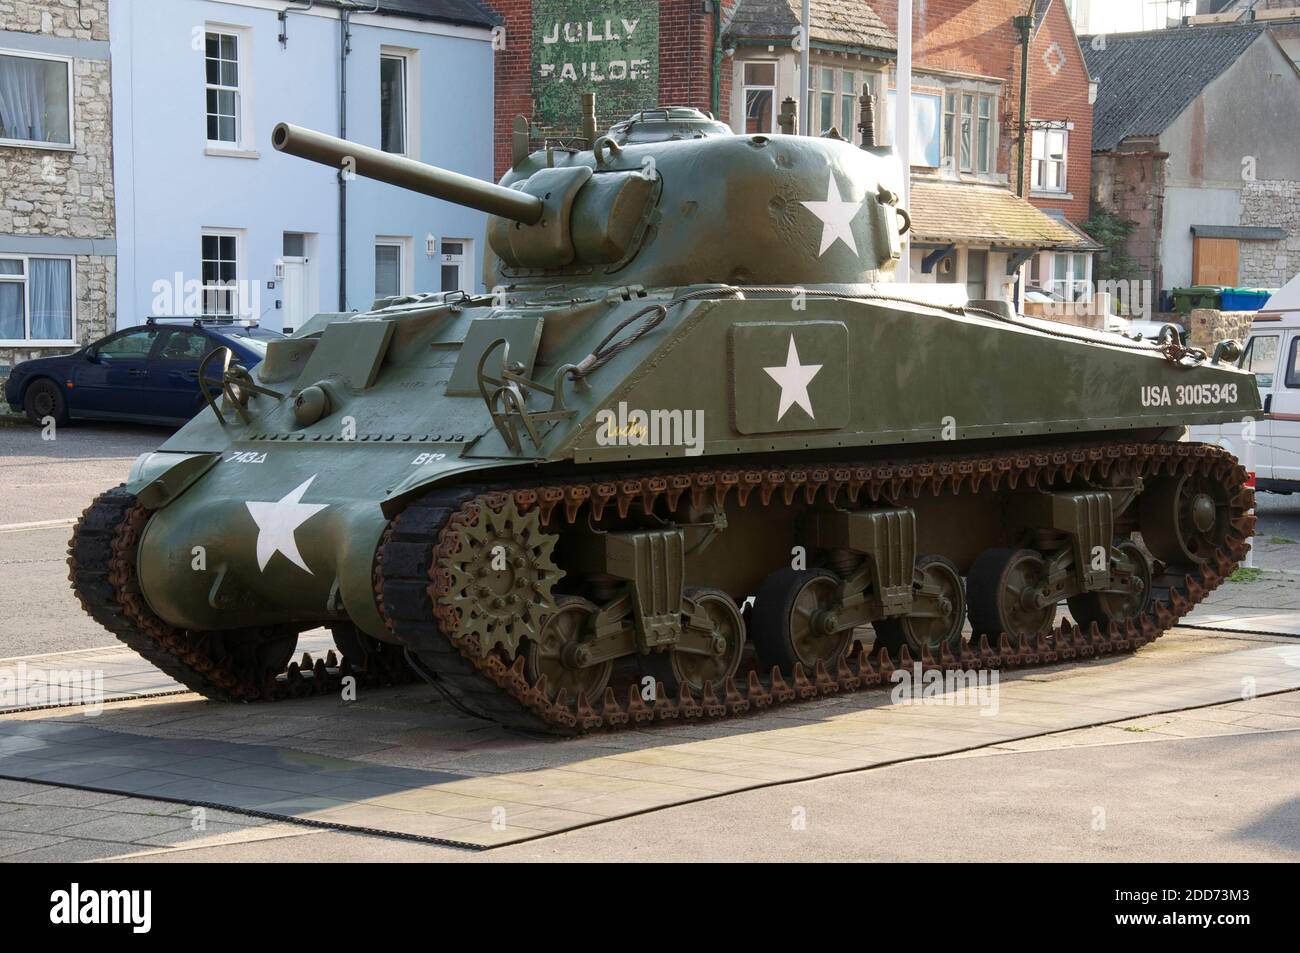 Historic American M4A4 Sherman tank, restored and on display outside the Castletown D-Day Centre and WW2 museum on the Isle of Portland. Dorset, UK. Stock Photo